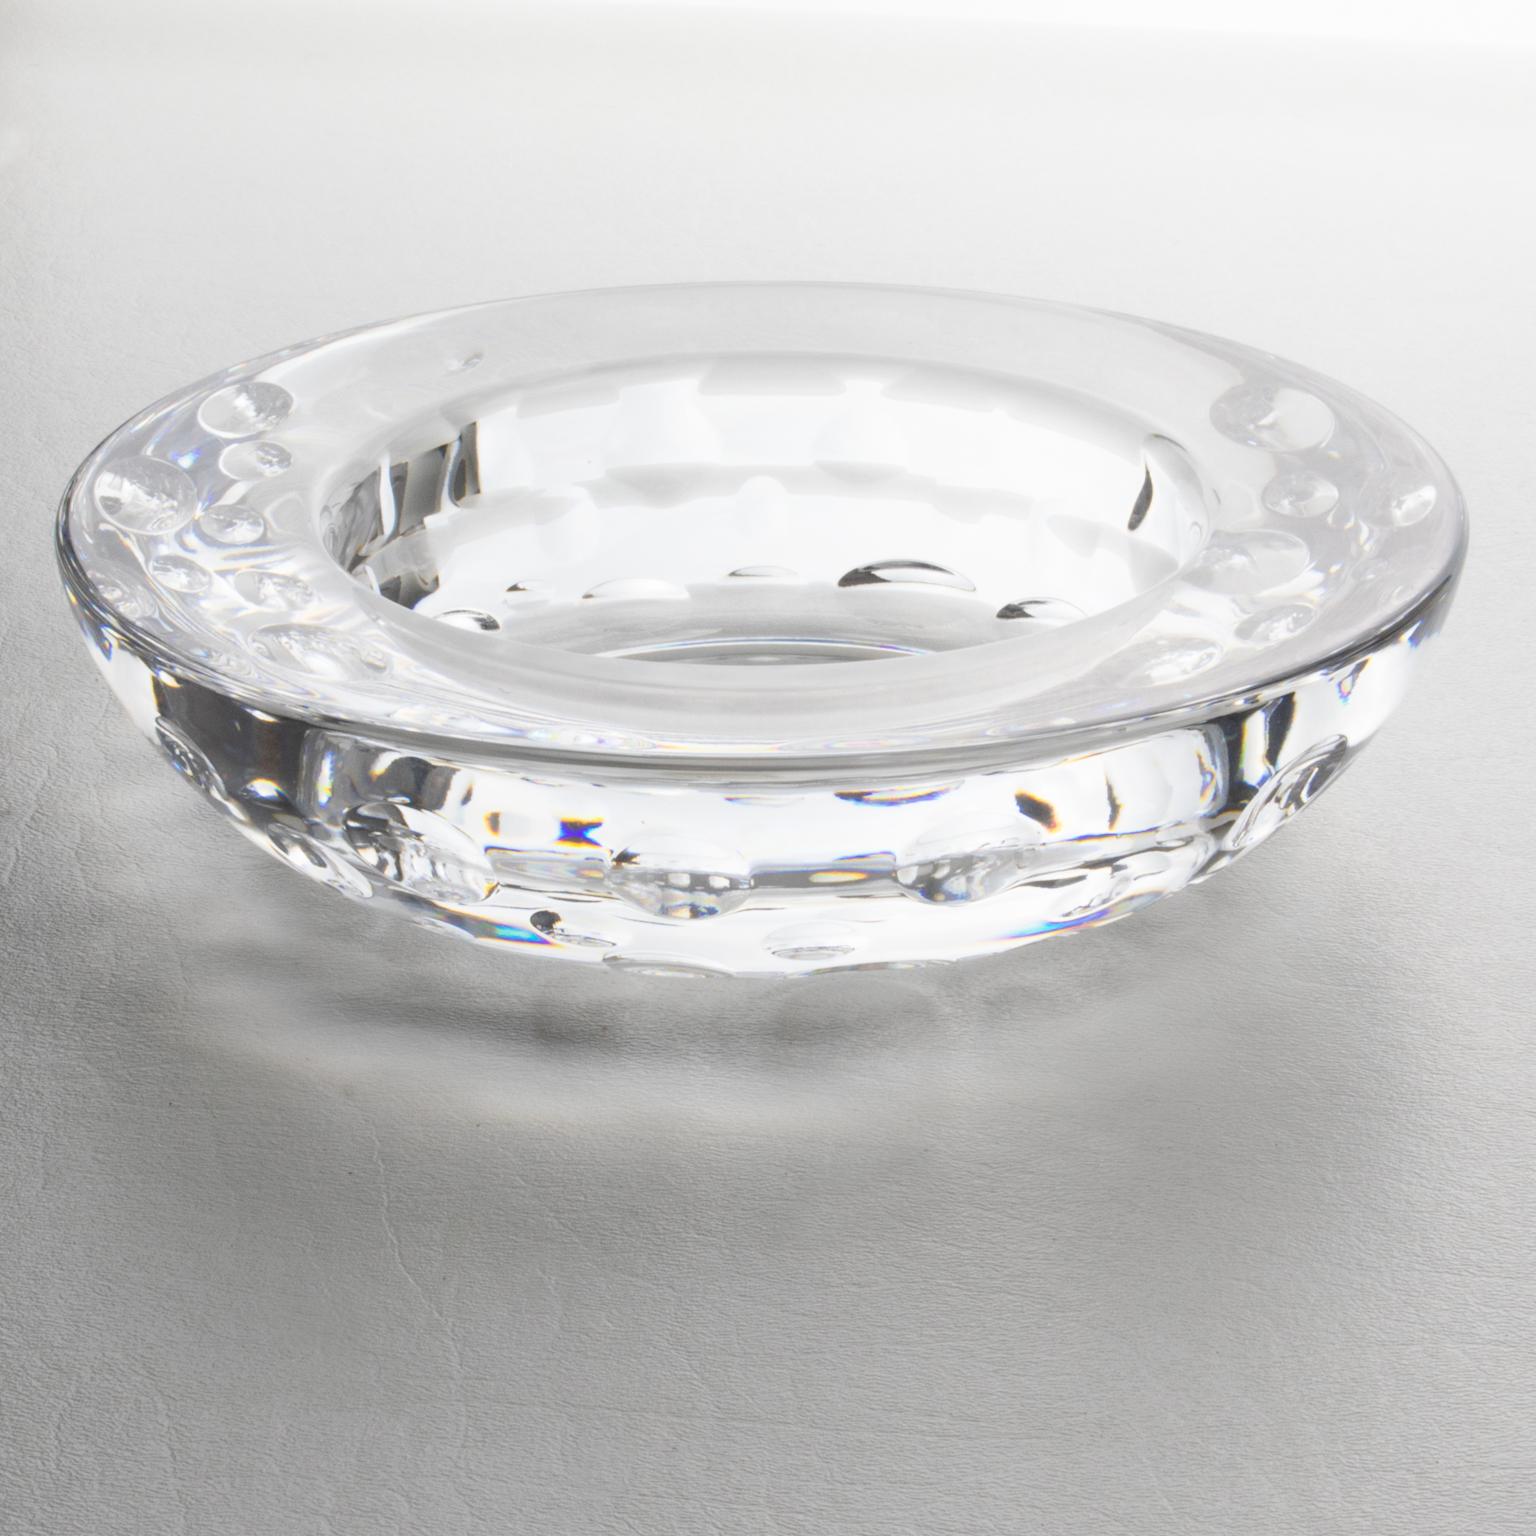 Lovely Christian Dior crystal cigar ashtray or bowl or desk tidy with heavily carved pattern. This lovely piece features bubble carving around. Marked on the inside with 